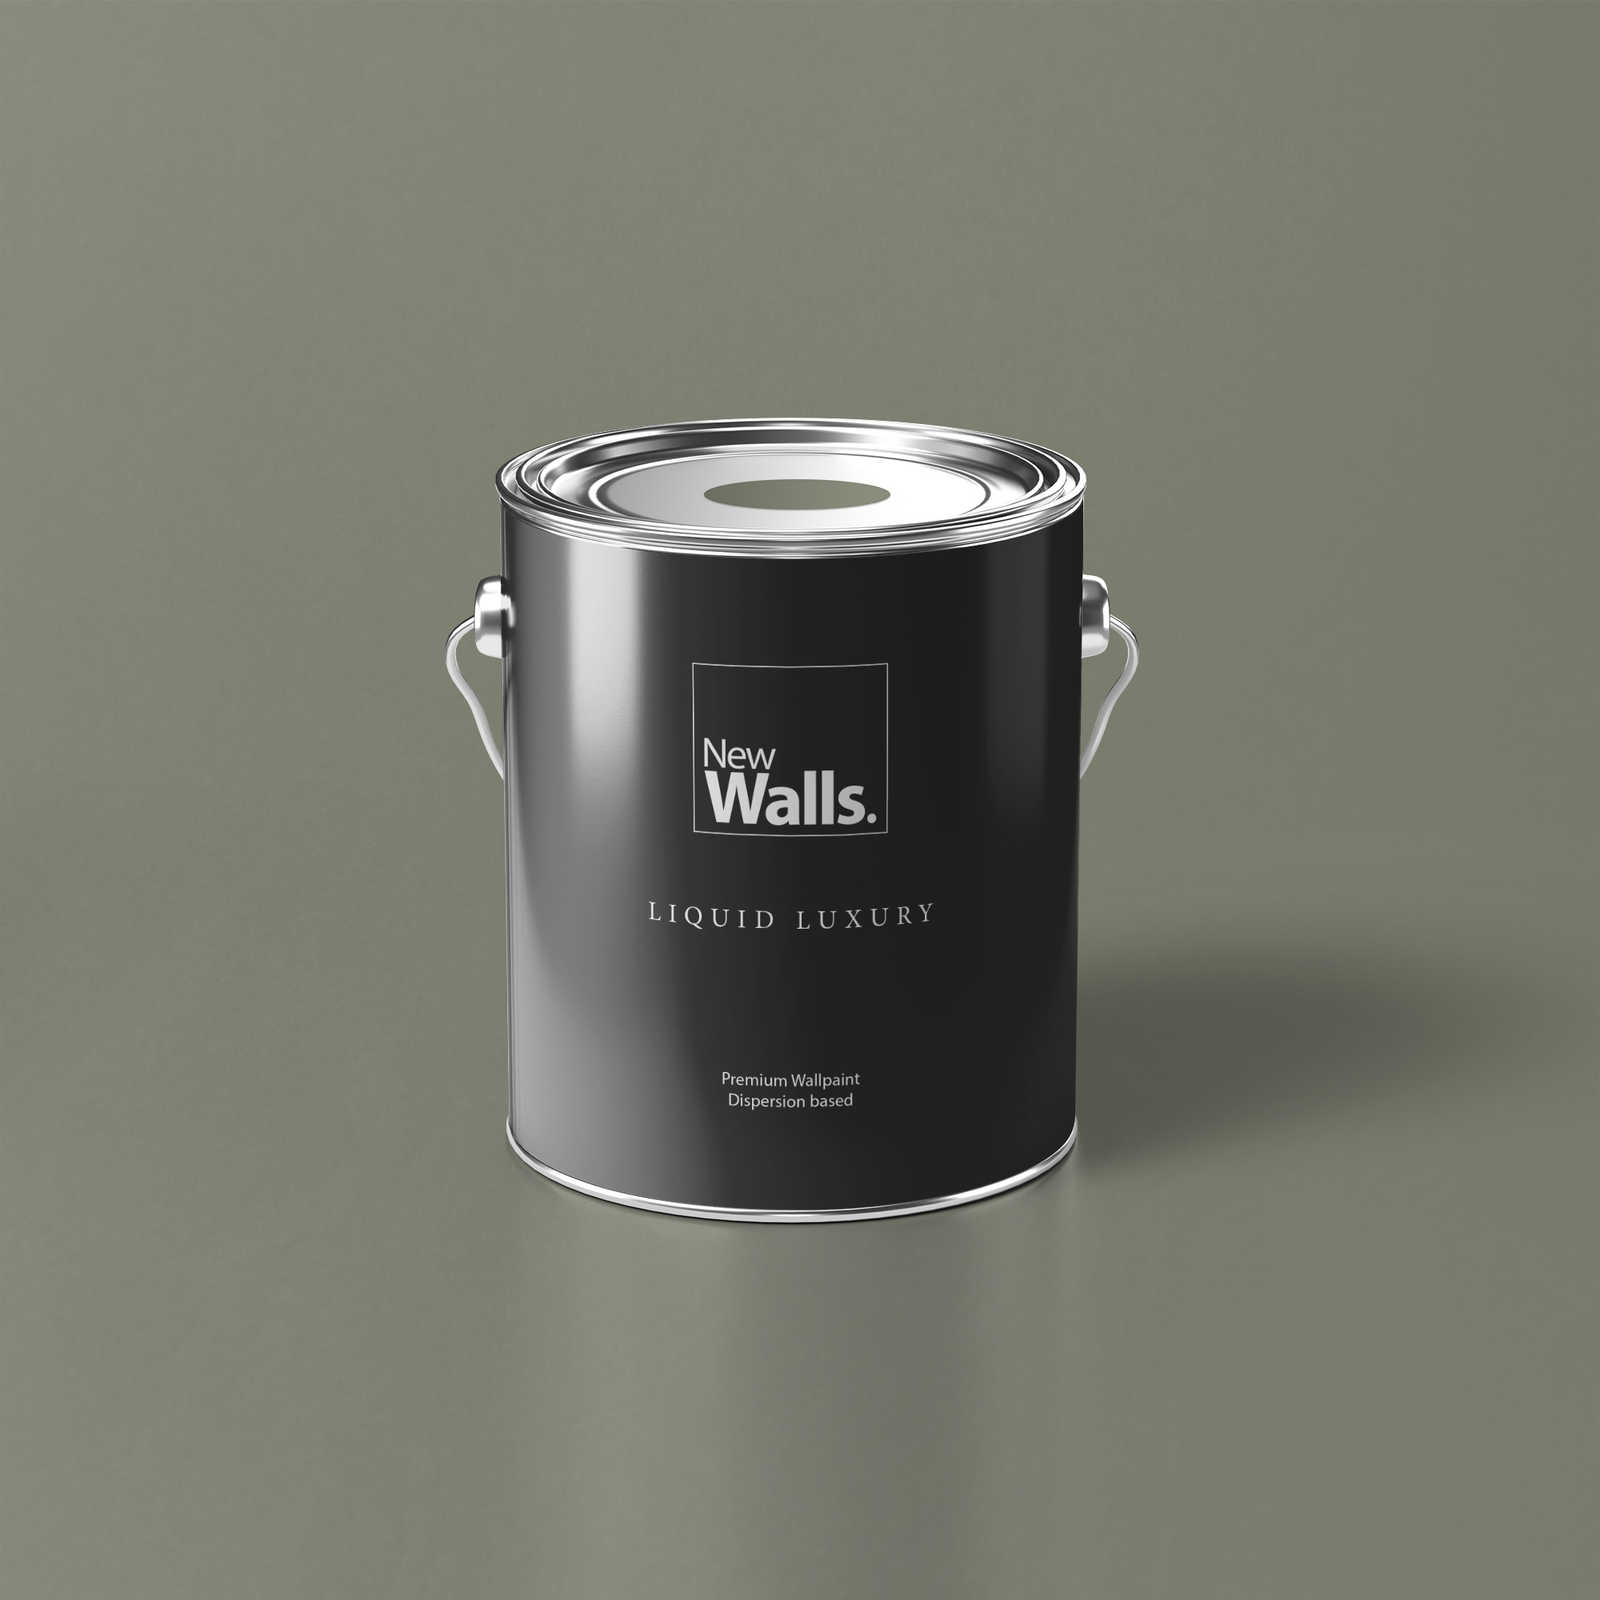 Premium Wall Paint Persuasive Olive Green »Talented calm taupe« NW706 – 5 litre
